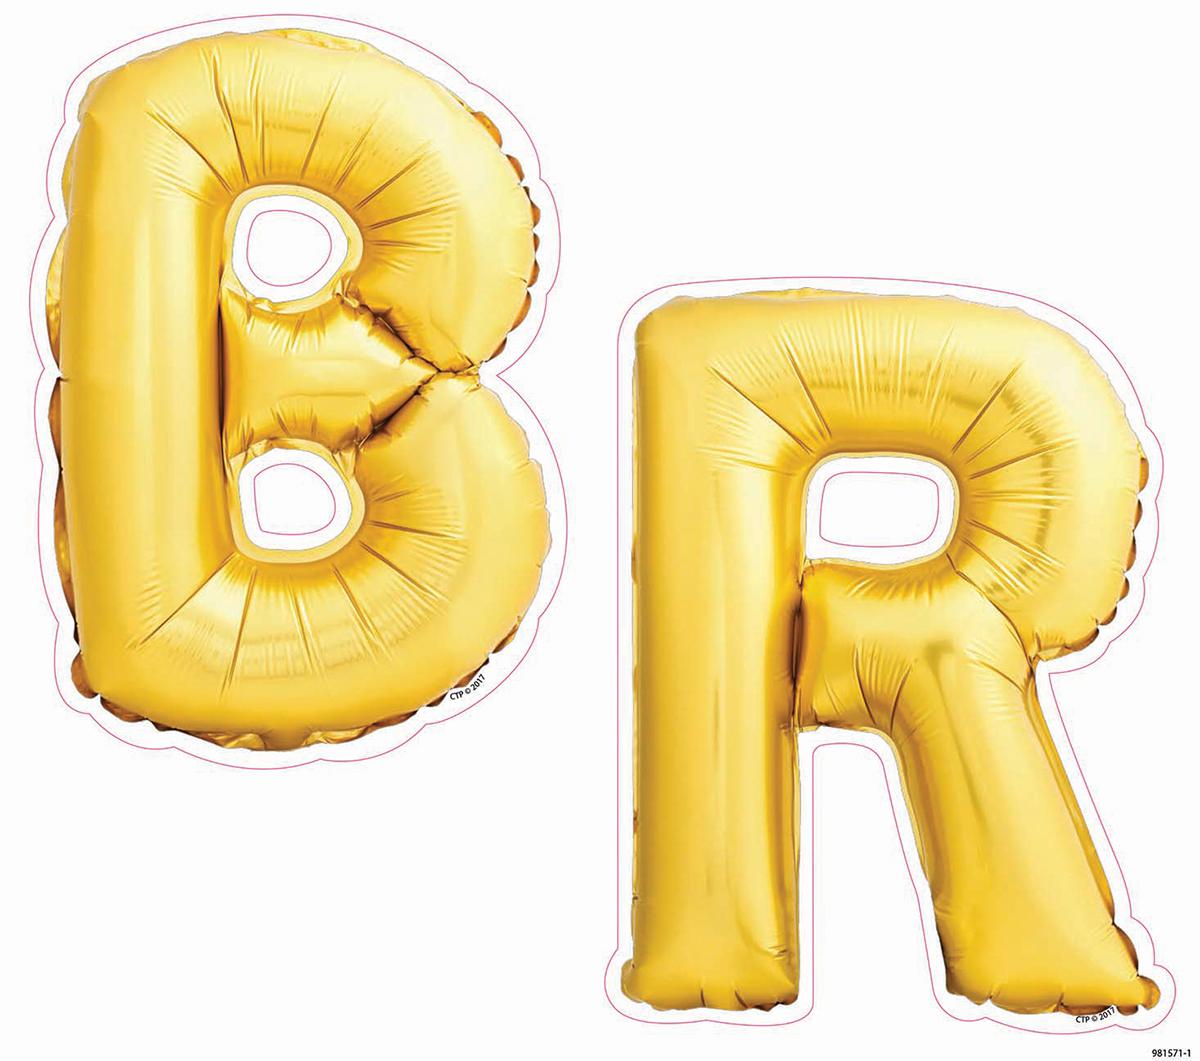  Punch-Out Gold Mylar Balloon Uppercase Designer Letters 